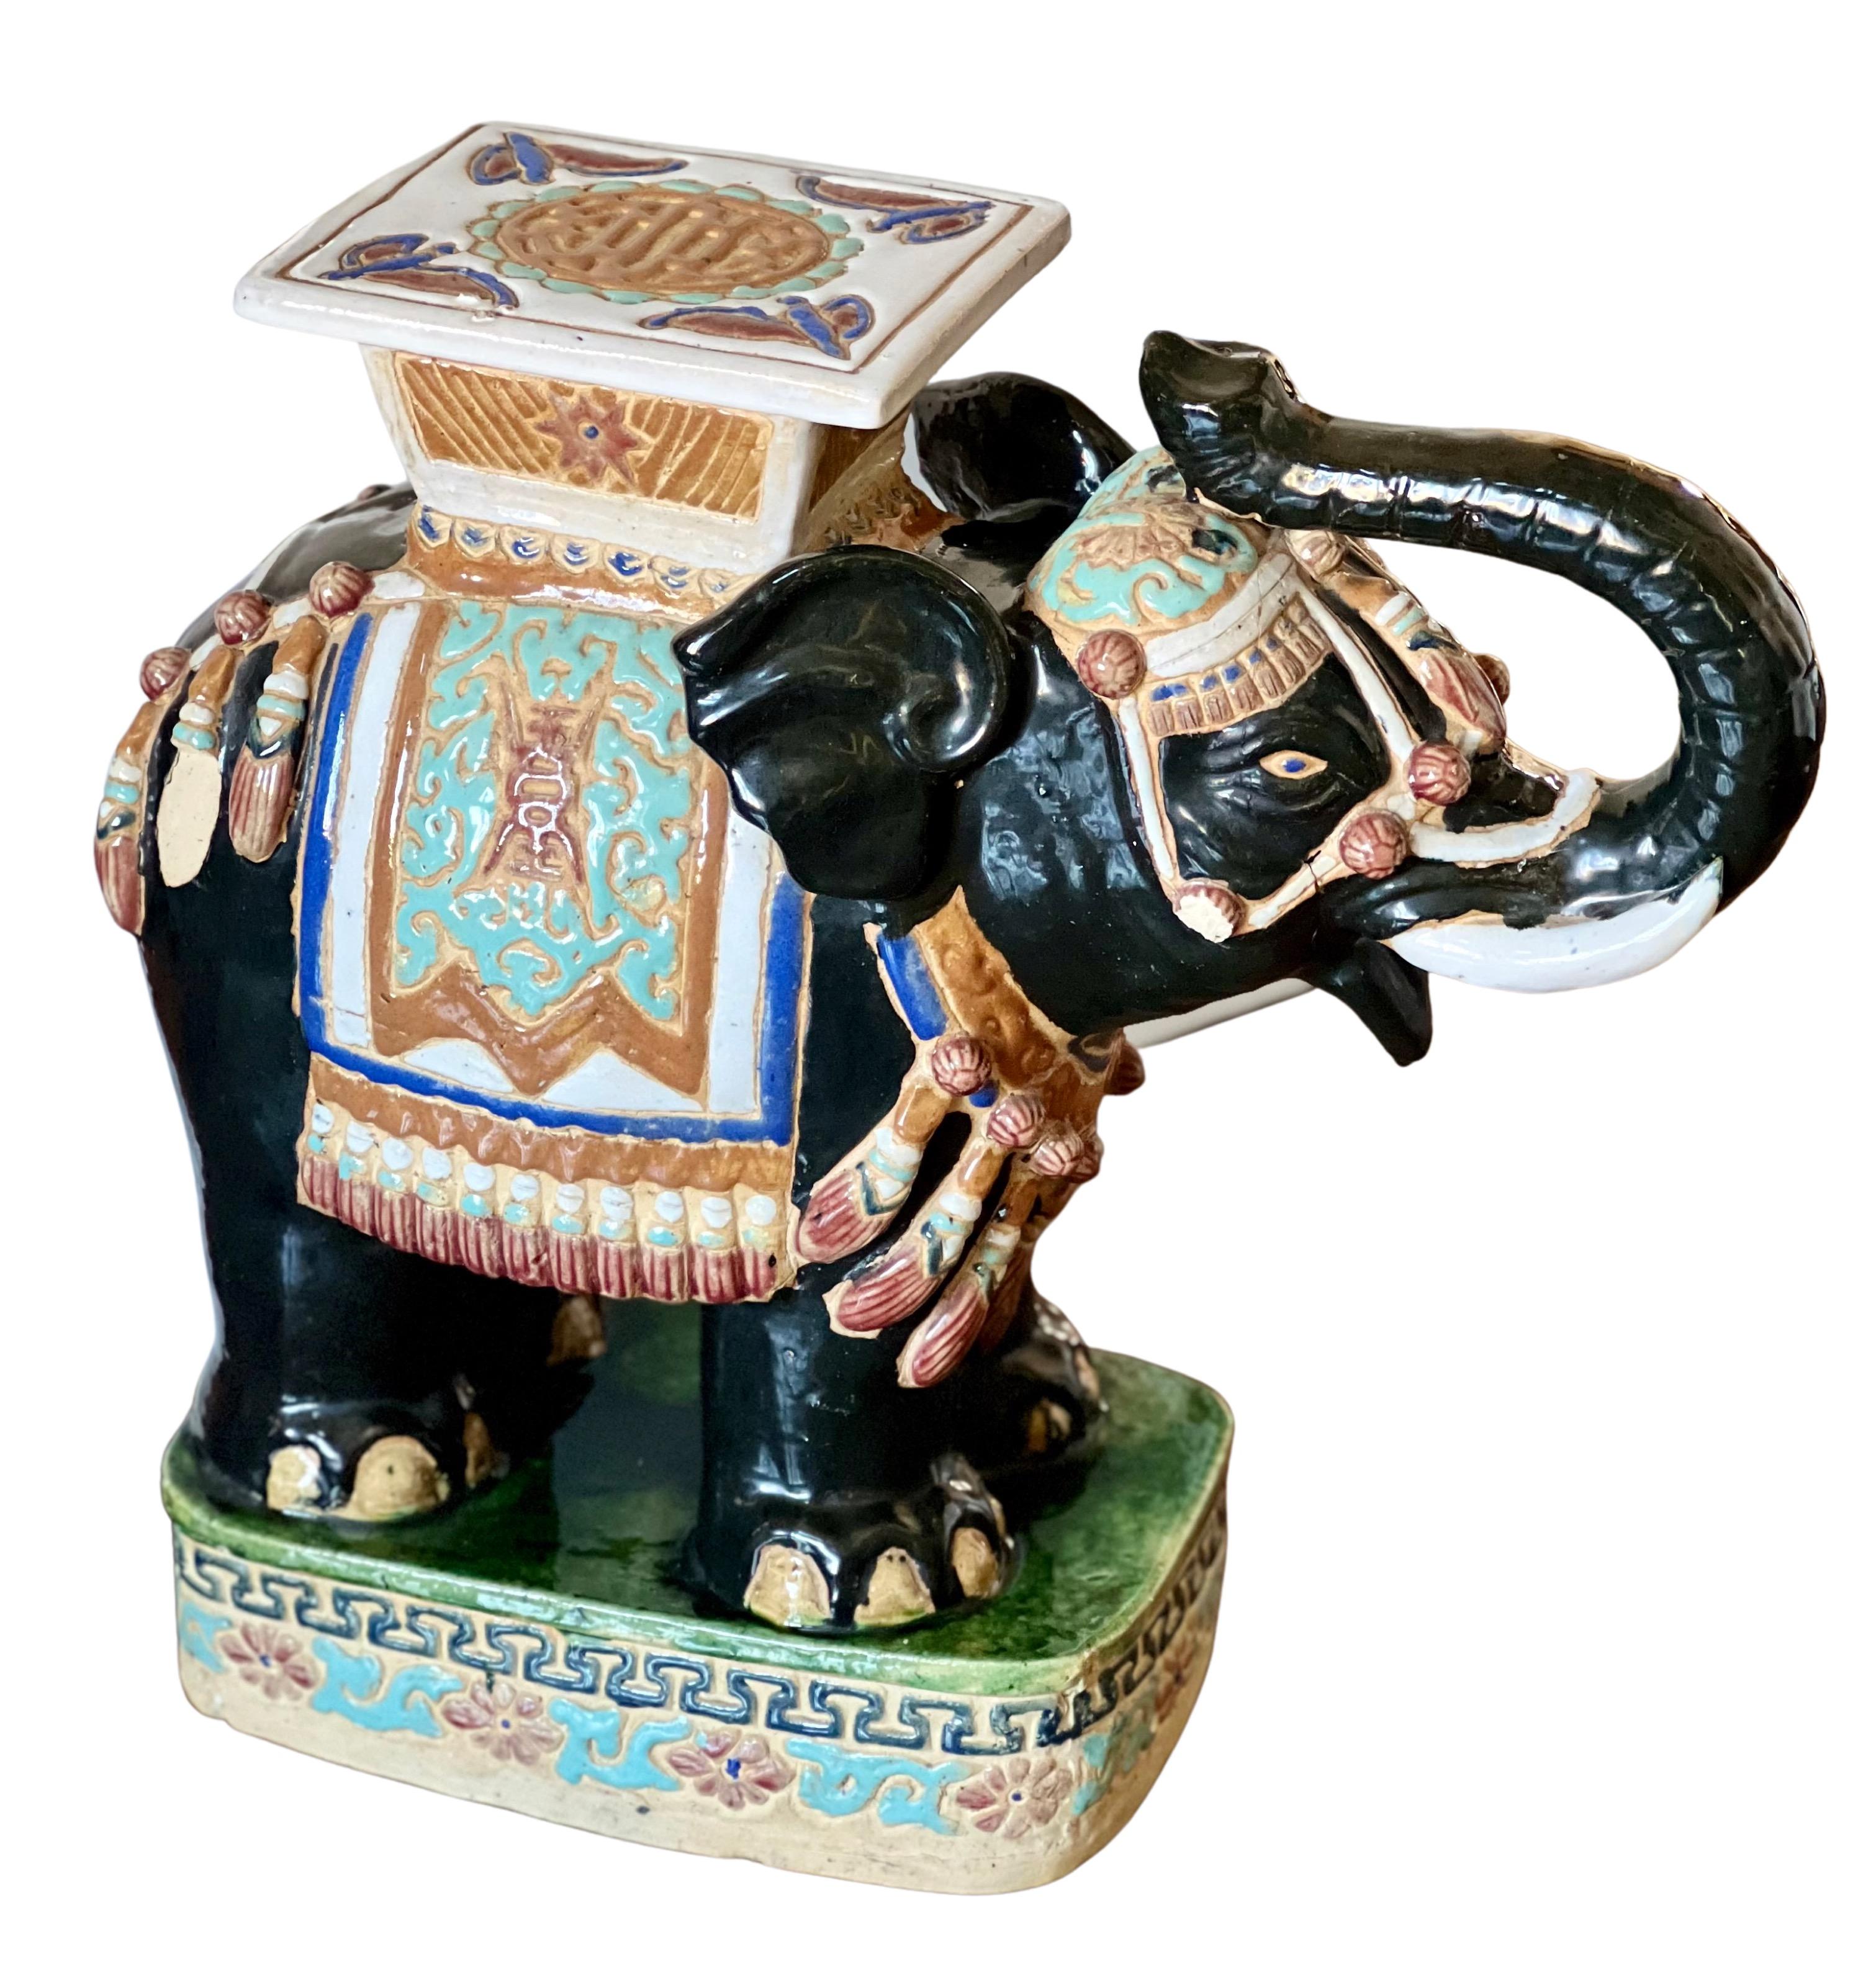 Vintage elephant garden stool or drink side table. Adorable elephant with raised trunk in vibrantly glazed white garden terracotta. Charming accent to your garden patio or perfect for a drink side table in any setting.